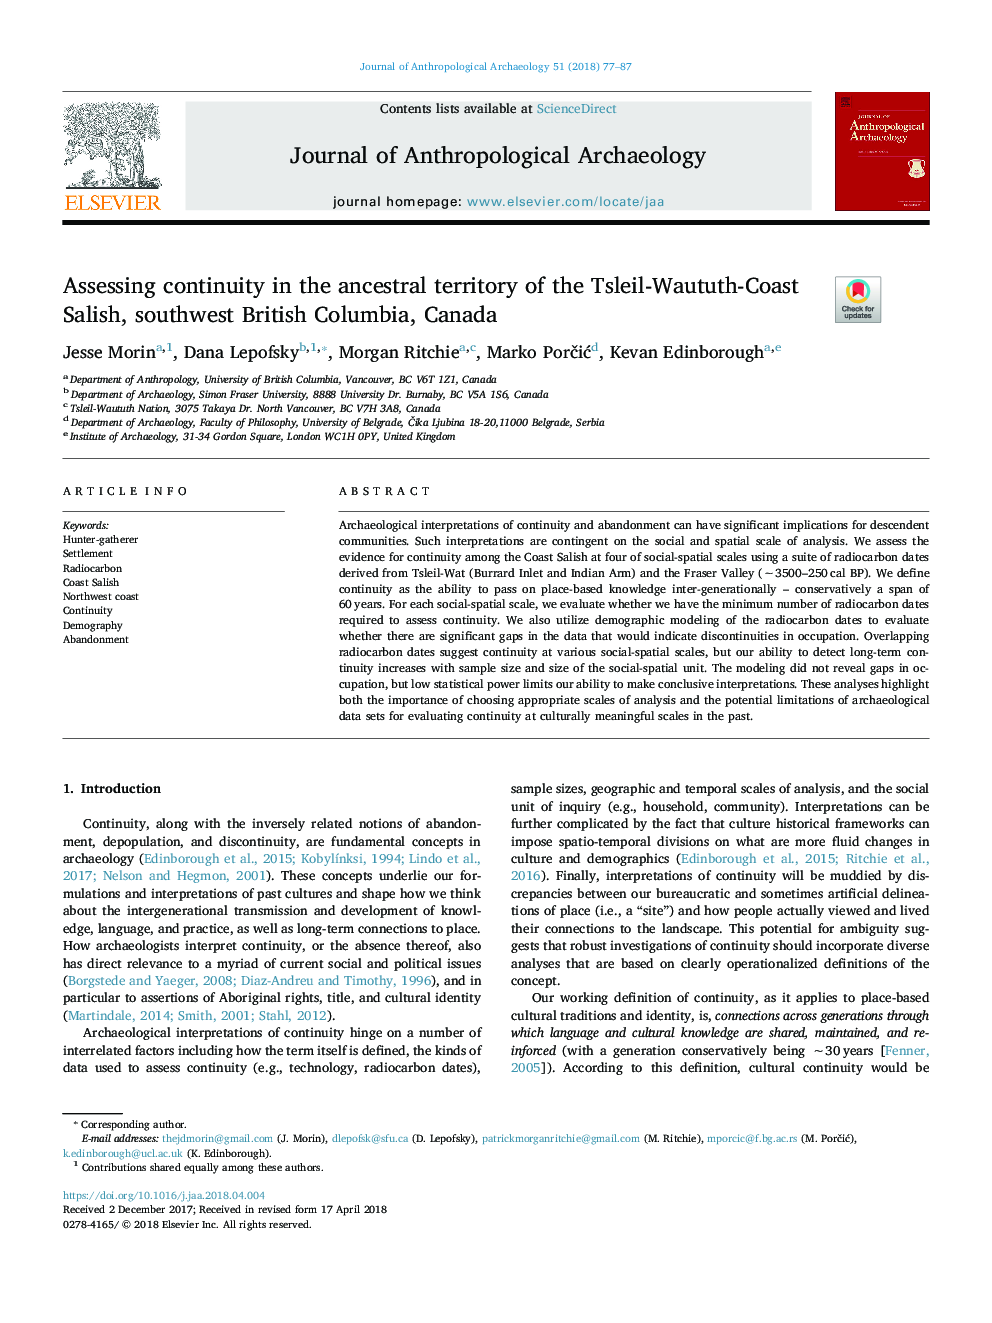 Assessing continuity in the ancestral territory of the Tsleil-Waututh-Coast Salish, southwest British Columbia, Canada